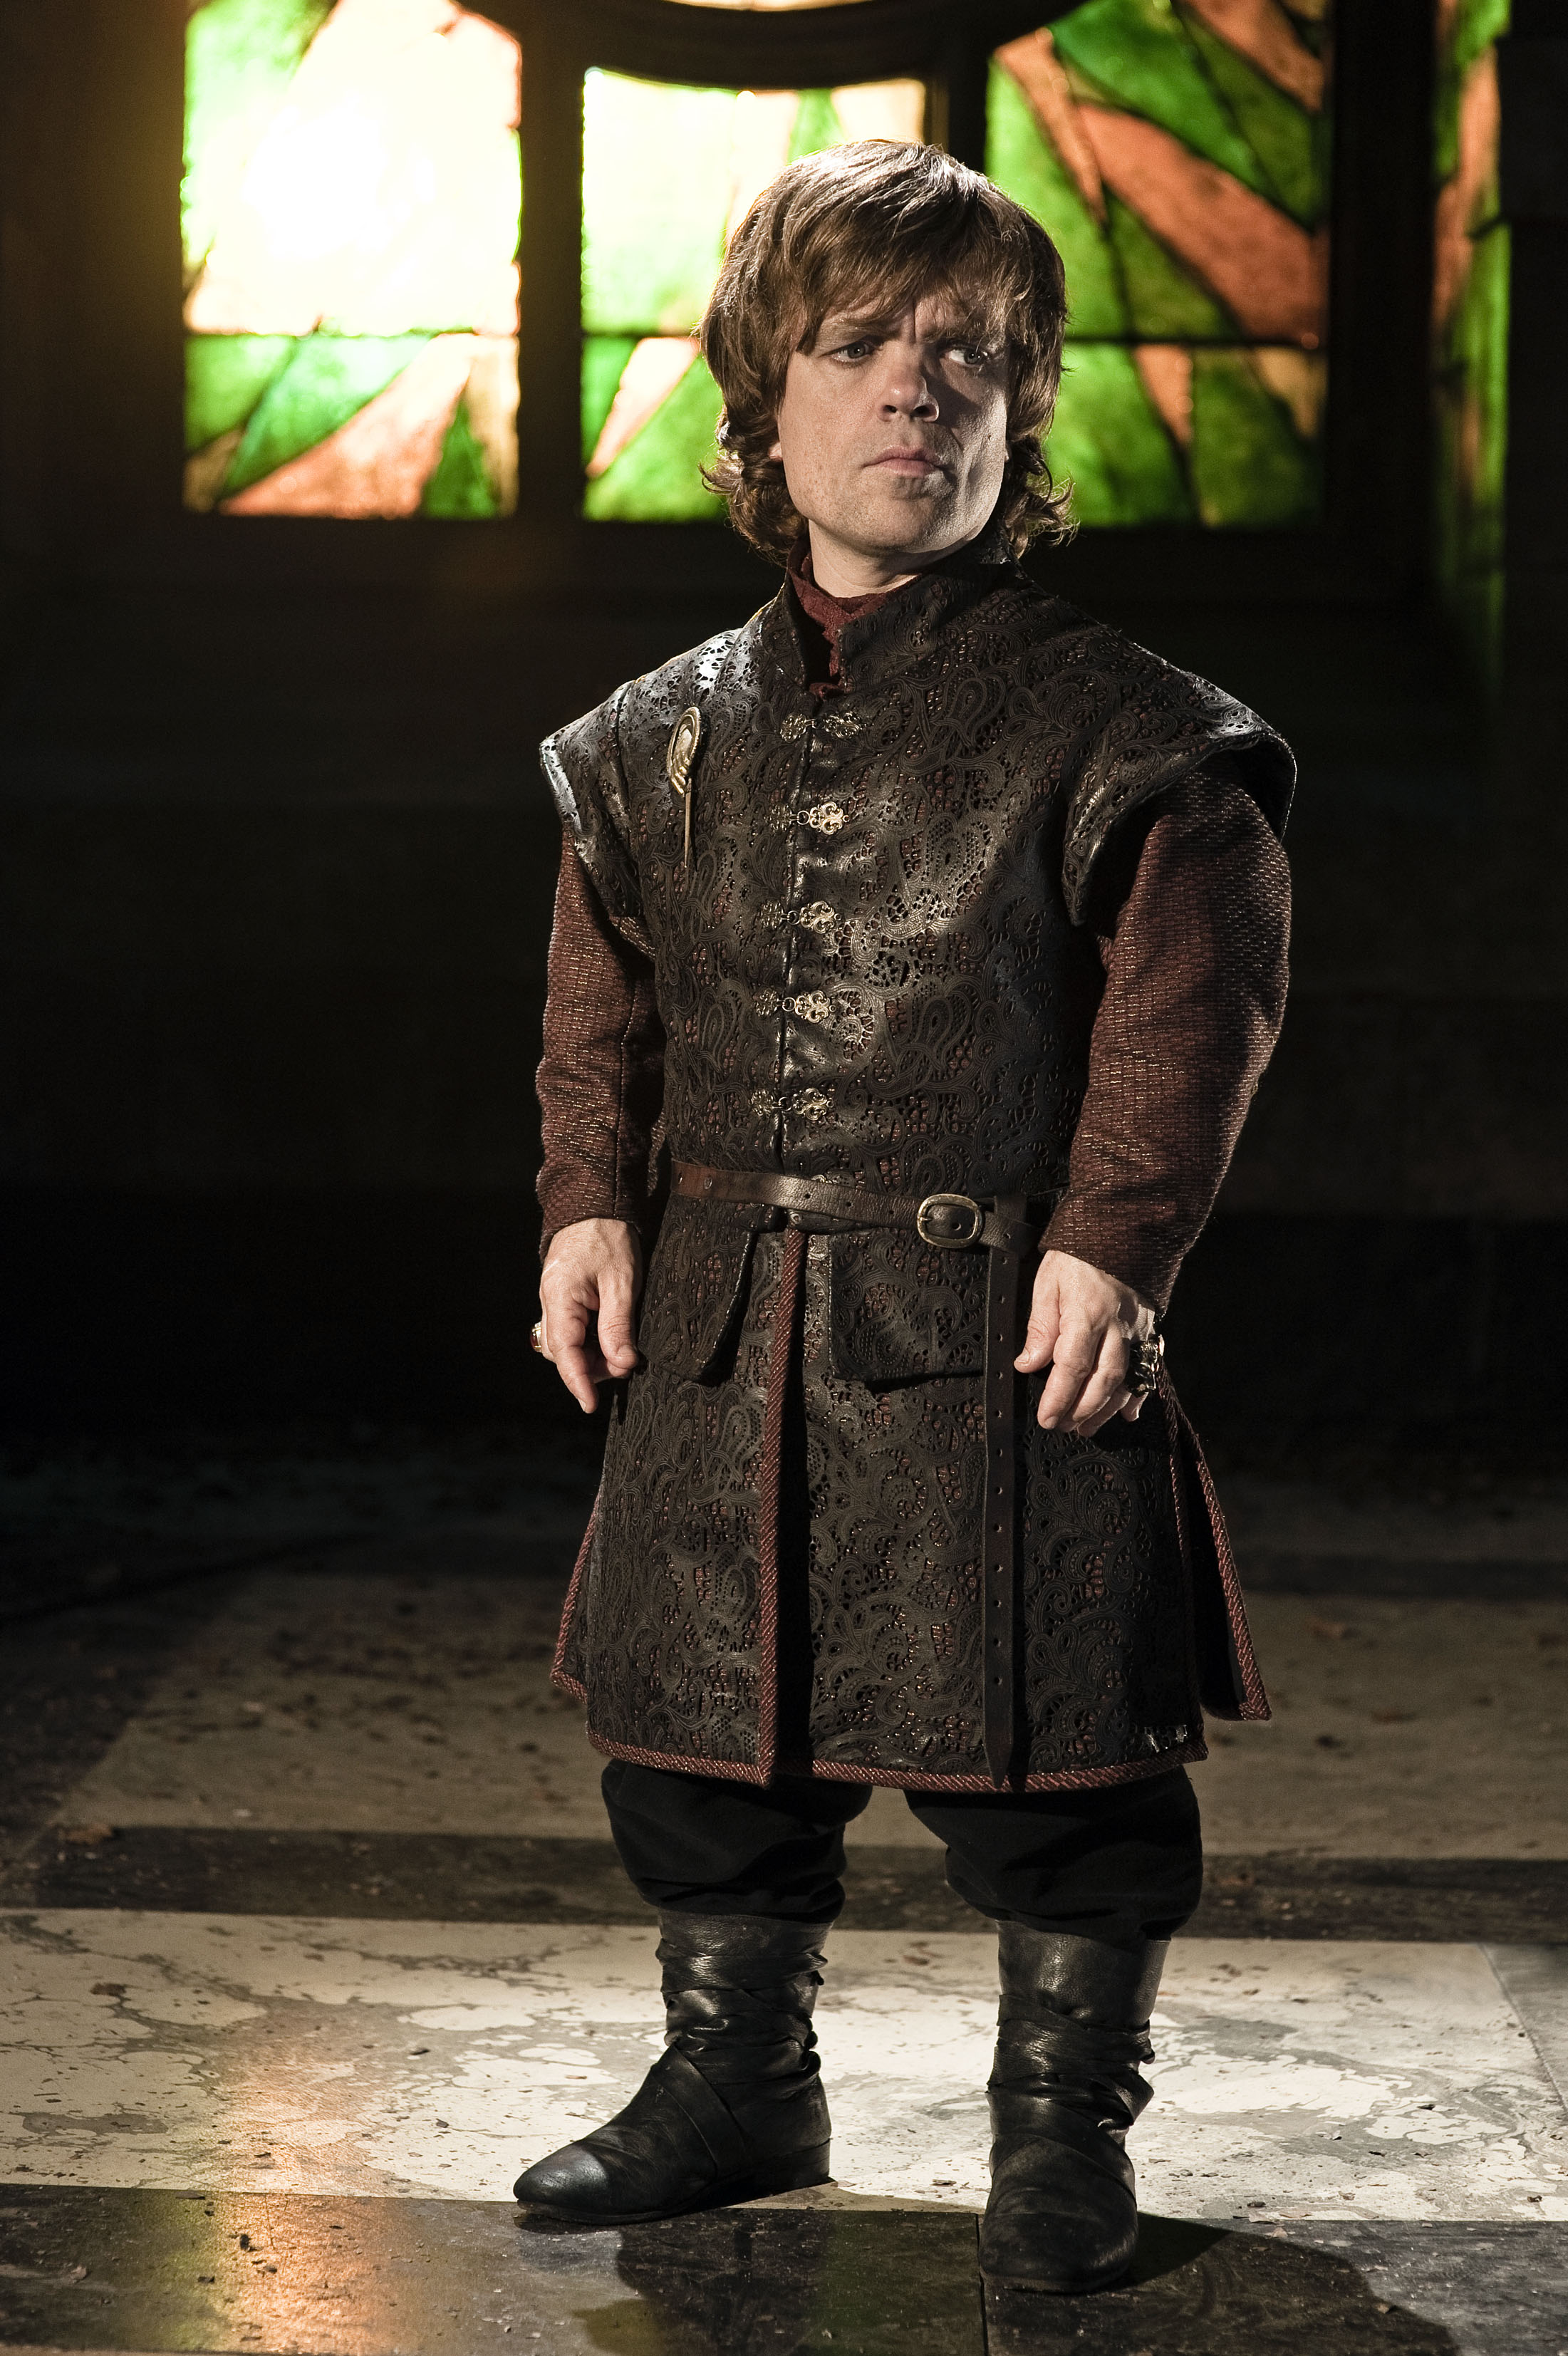 Tyrion Lannister - Tyrion Lannister Photo (37249035) - Fanpop